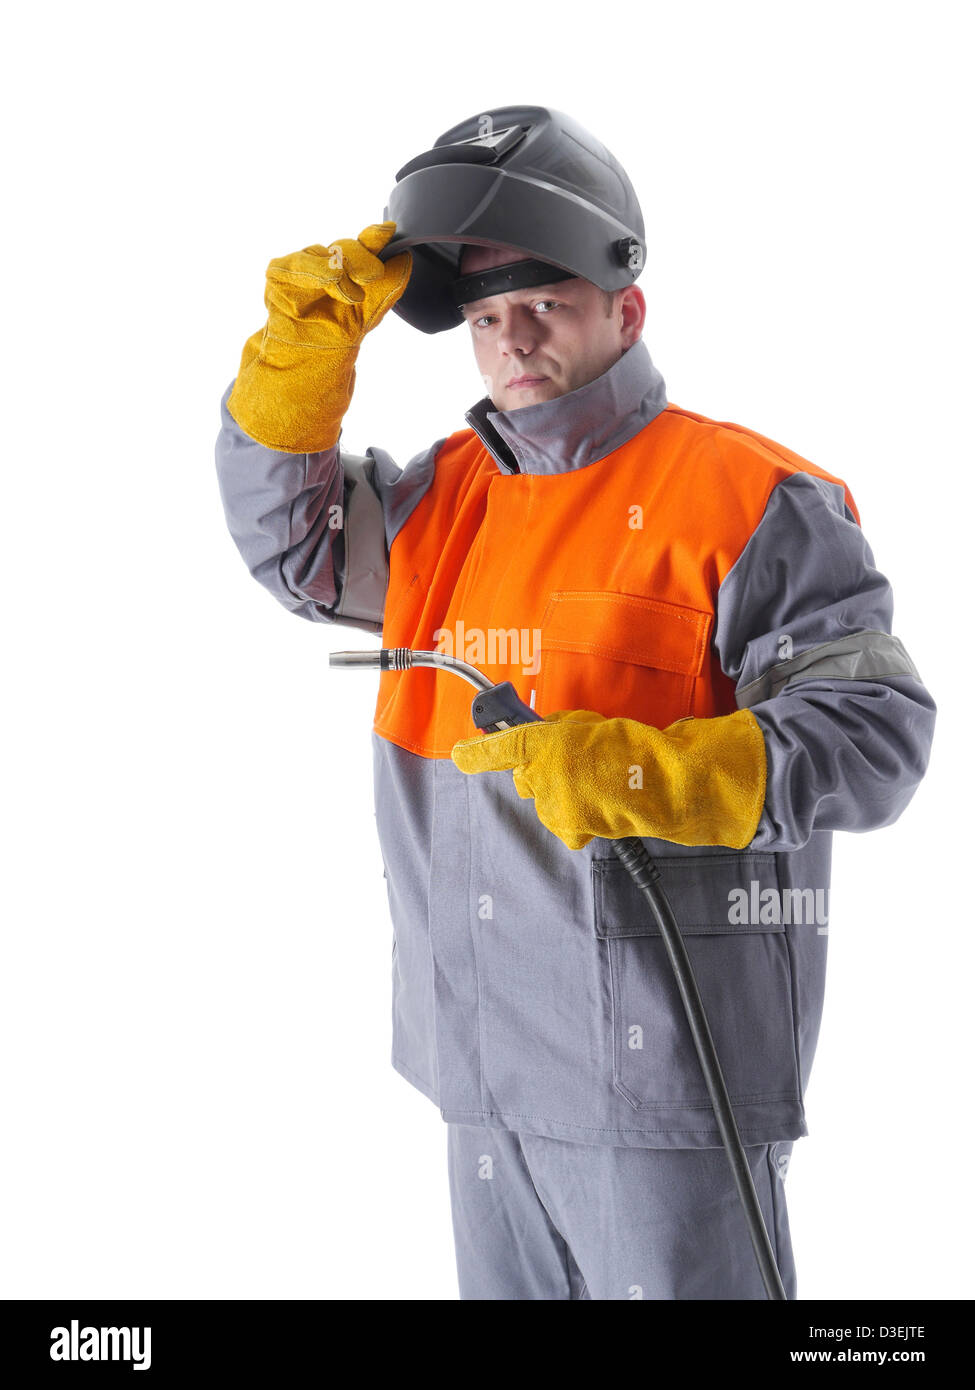 Welder wearing protective suit and welding hood holding gas welding gun on white Stock Photo